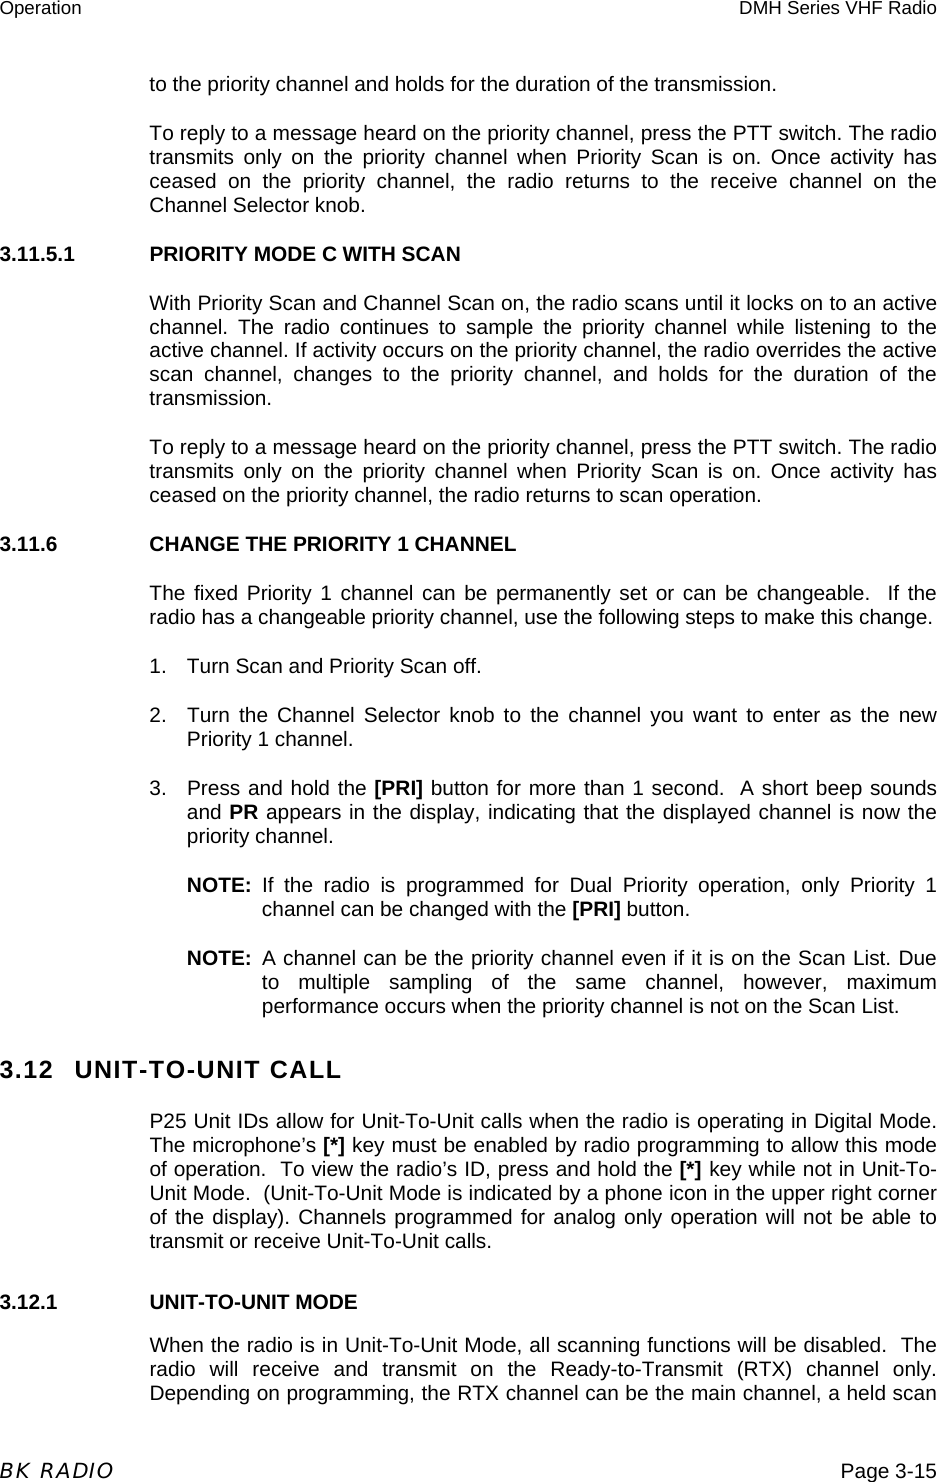 Operation  DMH Series VHF Radio  BK RADIO  Page 3-15 to the priority channel and holds for the duration of the transmission. To reply to a message heard on the priority channel, press the PTT switch. The radio transmits only on the priority channel when Priority Scan is on. Once activity has ceased on the priority channel, the radio returns to the receive channel on the Channel Selector knob. 3.11.5.1  PRIORITY MODE C WITH SCAN With Priority Scan and Channel Scan on, the radio scans until it locks on to an active channel. The radio continues to sample the priority channel while listening to the active channel. If activity occurs on the priority channel, the radio overrides the active scan channel, changes to the priority channel, and holds for the duration of the transmission. To reply to a message heard on the priority channel, press the PTT switch. The radio transmits only on the priority channel when Priority Scan is on. Once activity has ceased on the priority channel, the radio returns to scan operation. 3.11.6    CHANGE THE PRIORITY 1 CHANNEL The fixed Priority 1 channel can be permanently set or can be changeable.  If the radio has a changeable priority channel, use the following steps to make this change. 1.  Turn Scan and Priority Scan off. 2.  Turn the Channel Selector knob to the channel you want to enter as the new Priority 1 channel. 3.  Press and hold the [PRI] button for more than 1 second.  A short beep sounds and PR appears in the display, indicating that the displayed channel is now the priority channel. NOTE: If the radio is programmed for Dual Priority operation, only Priority 1 channel can be changed with the [PRI] button. NOTE: A channel can be the priority channel even if it is on the Scan List. Due to multiple sampling of the same channel, however, maximum performance occurs when the priority channel is not on the Scan List. 3.12 UNIT-TO-UNIT CALL P25 Unit IDs allow for Unit-To-Unit calls when the radio is operating in Digital Mode.  The microphone’s [*] key must be enabled by radio programming to allow this mode of operation.  To view the radio’s ID, press and hold the [*] key while not in Unit-To-Unit Mode.  (Unit-To-Unit Mode is indicated by a phone icon in the upper right corner of the display). Channels programmed for analog only operation will not be able to transmit or receive Unit-To-Unit calls. 3.12.1   UNIT-TO-UNIT MODE When the radio is in Unit-To-Unit Mode, all scanning functions will be disabled.  The radio will receive and transmit on the Ready-to-Transmit (RTX) channel only.  Depending on programming, the RTX channel can be the main channel, a held scan 